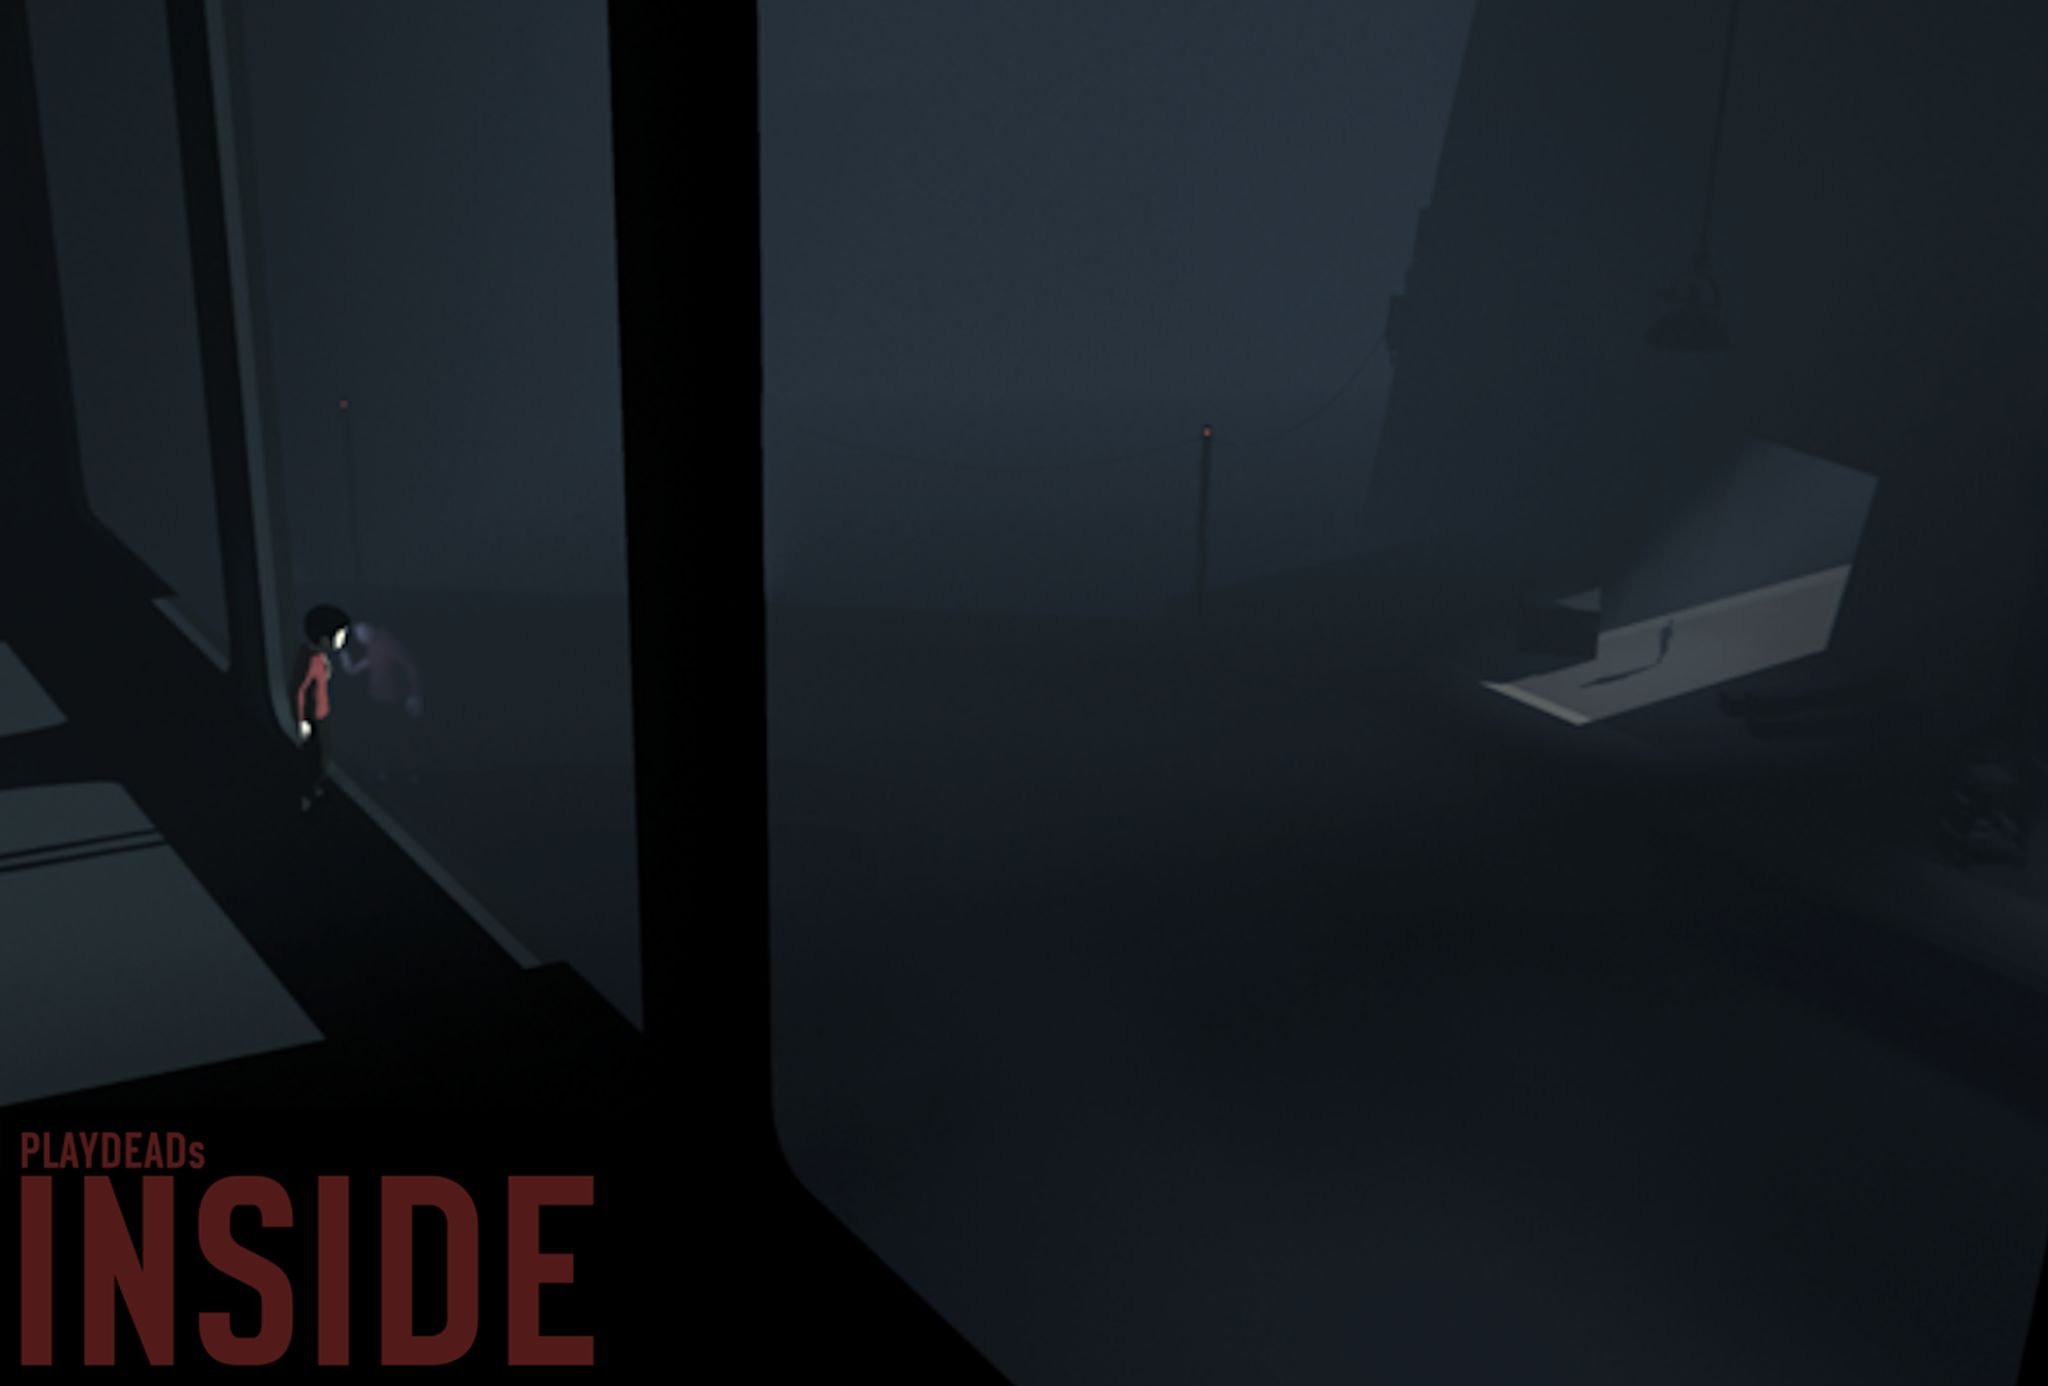 Inside, the Xbox One follow-up to Limbo, delayed